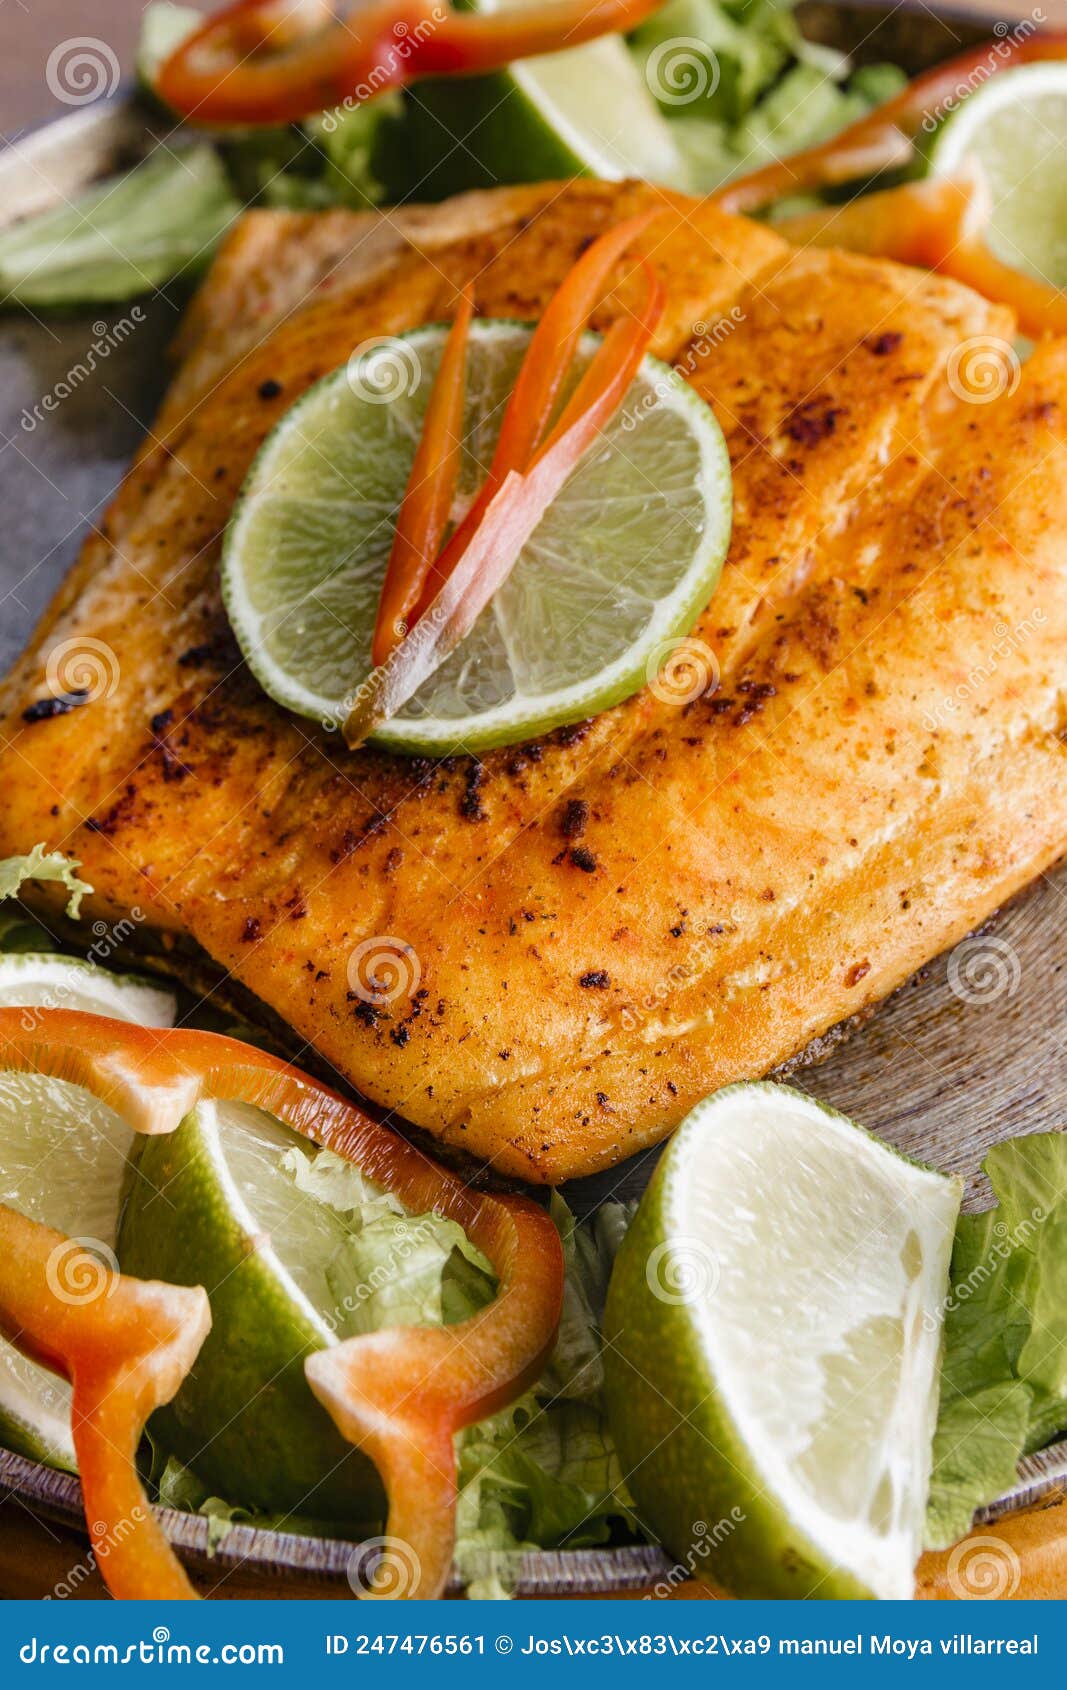 Delicious Fish Fried and Ready To Eat Stock Image - Image of appetizer ...